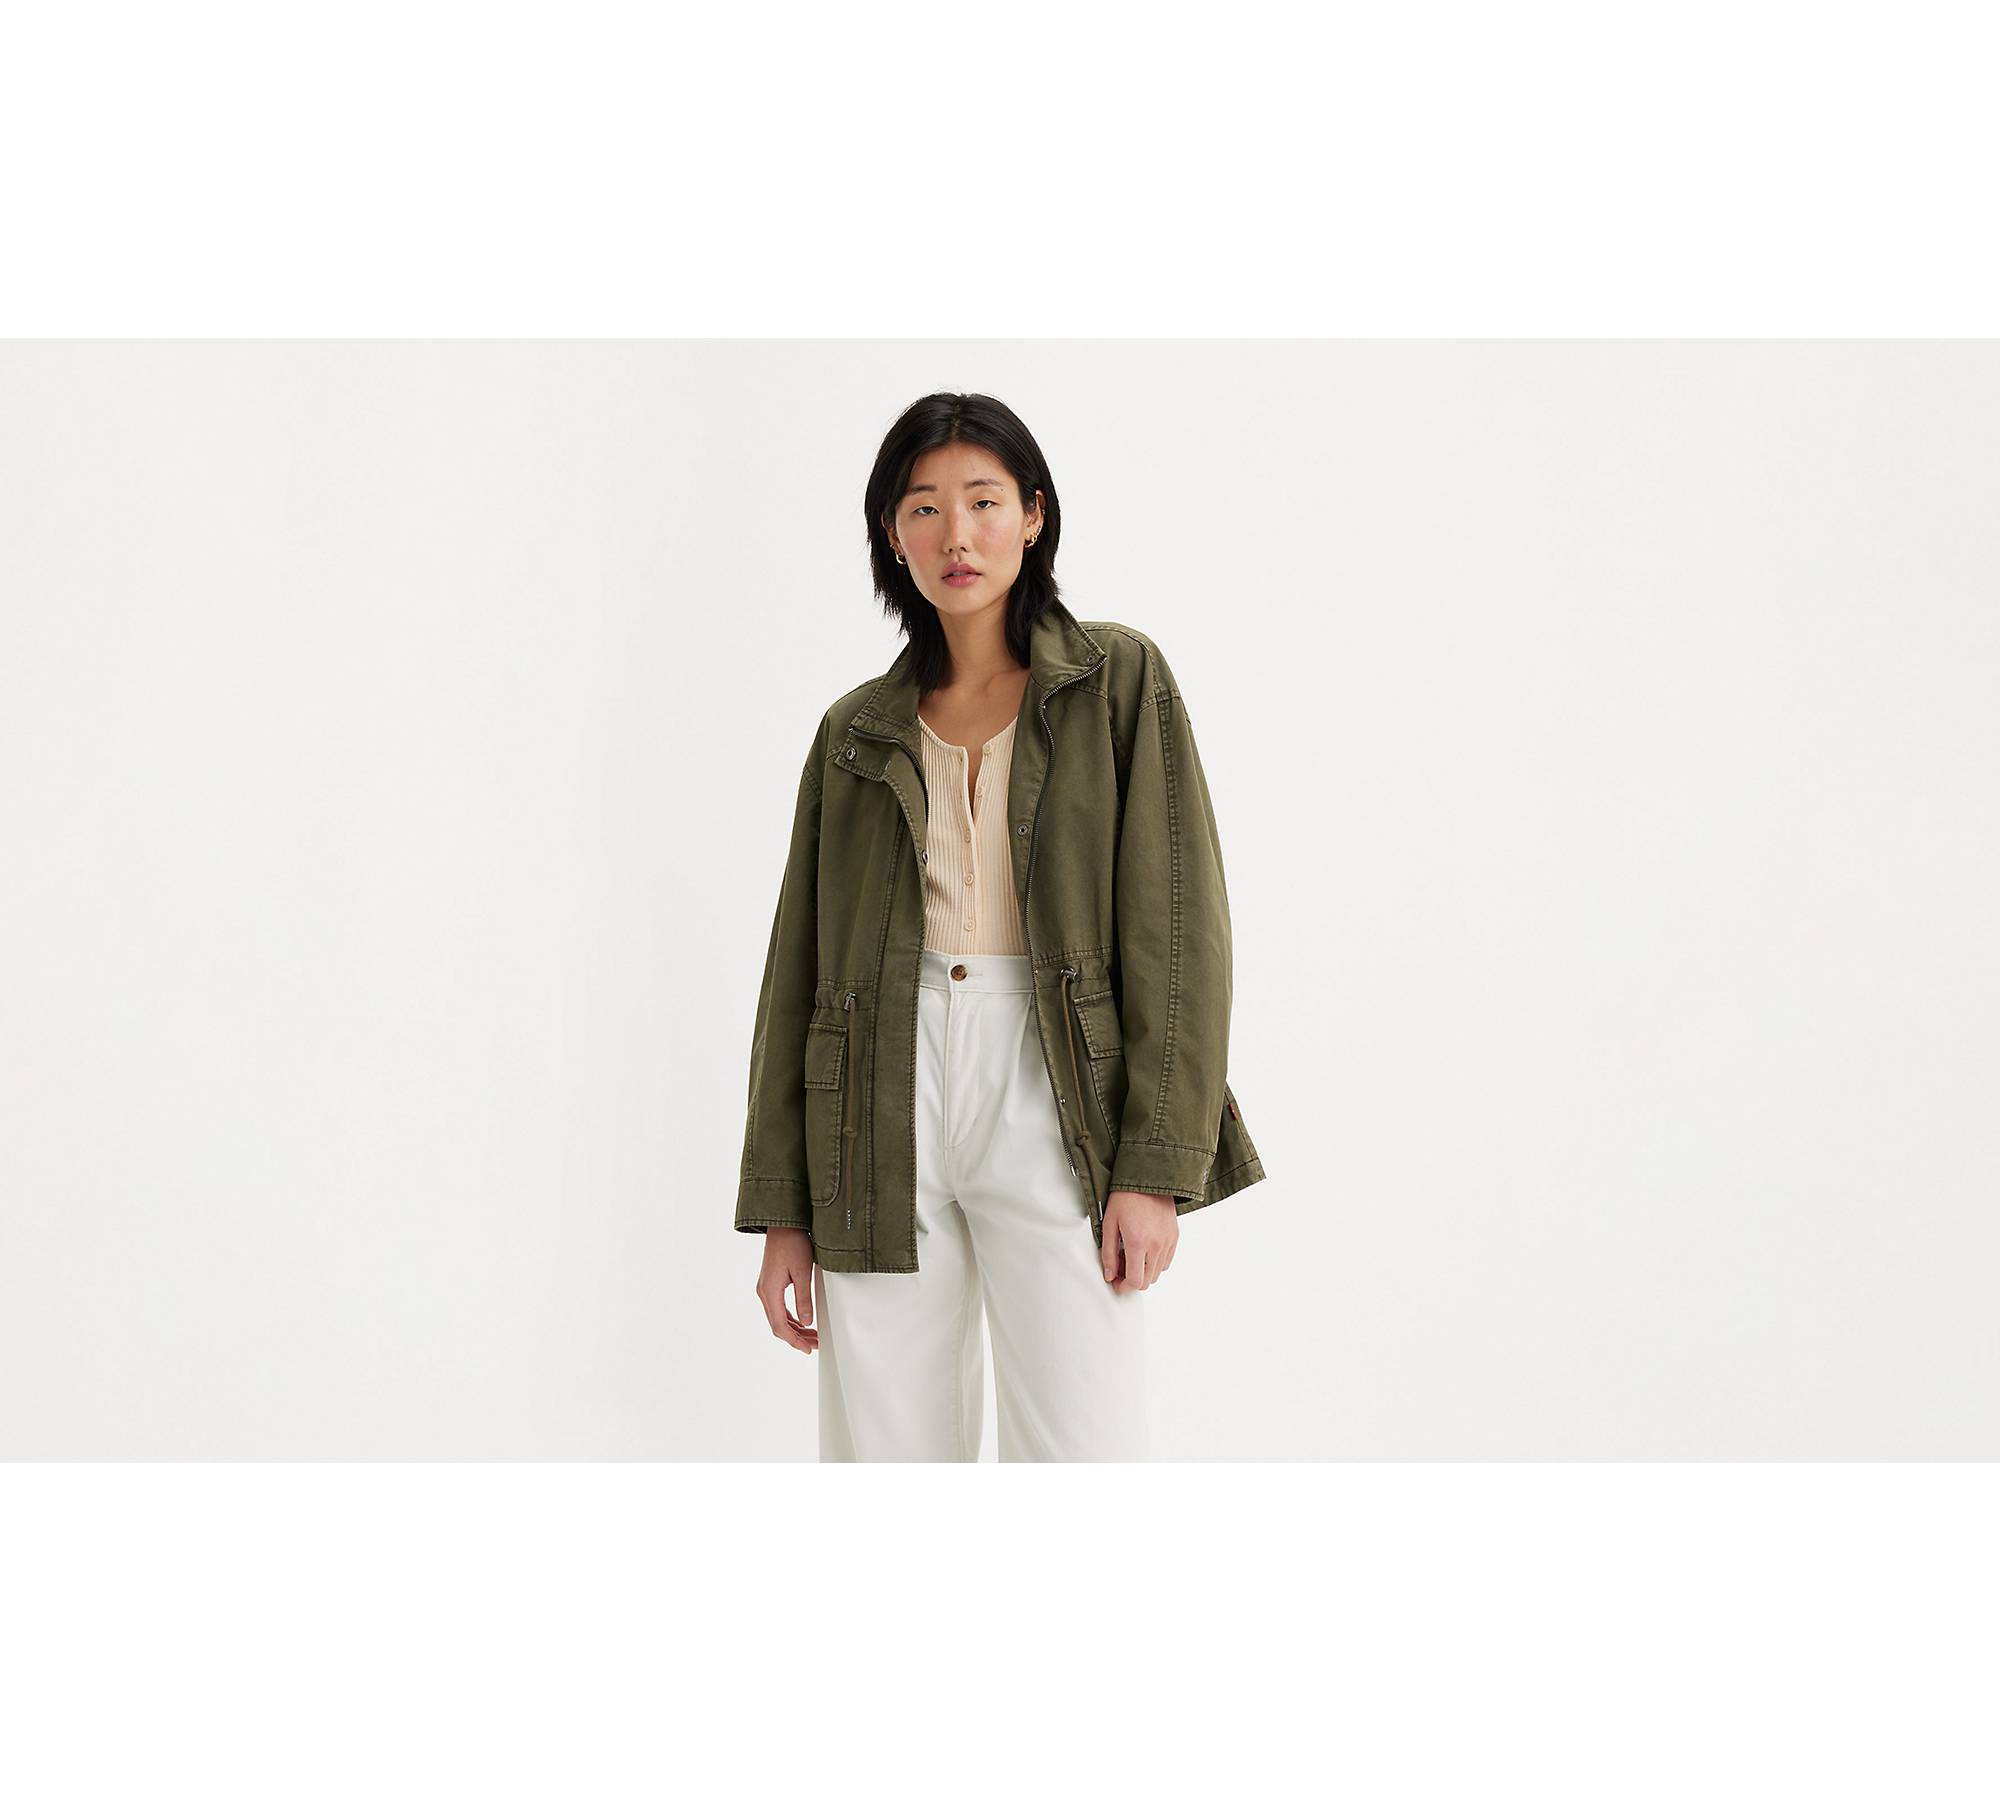 Stand Up Collar Military Jacket - Green | Levi's® US